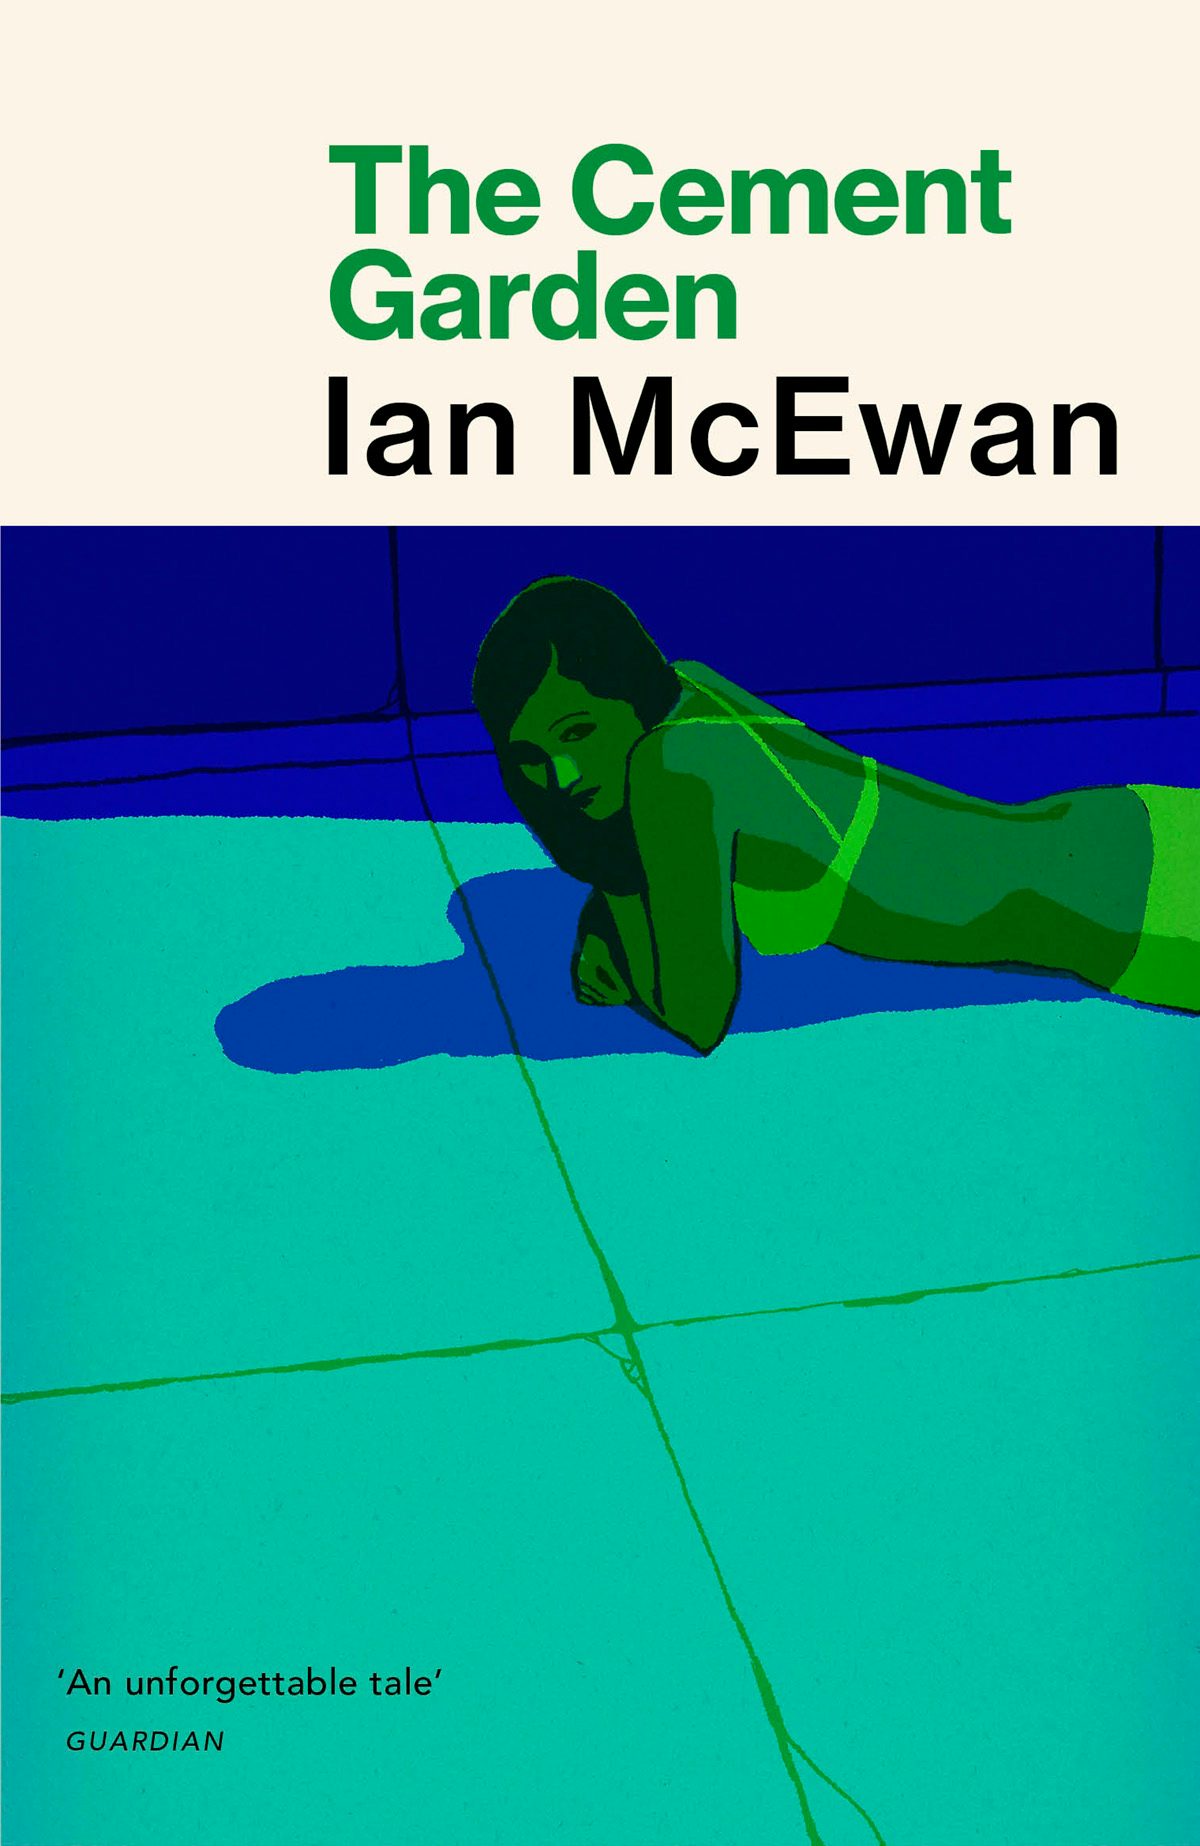 Cover of The Cement Garden by Ian McEwan showing an illustration of a person washed in a green hue and lying on their front wearing a strappy bikini top on a blue tiled floor